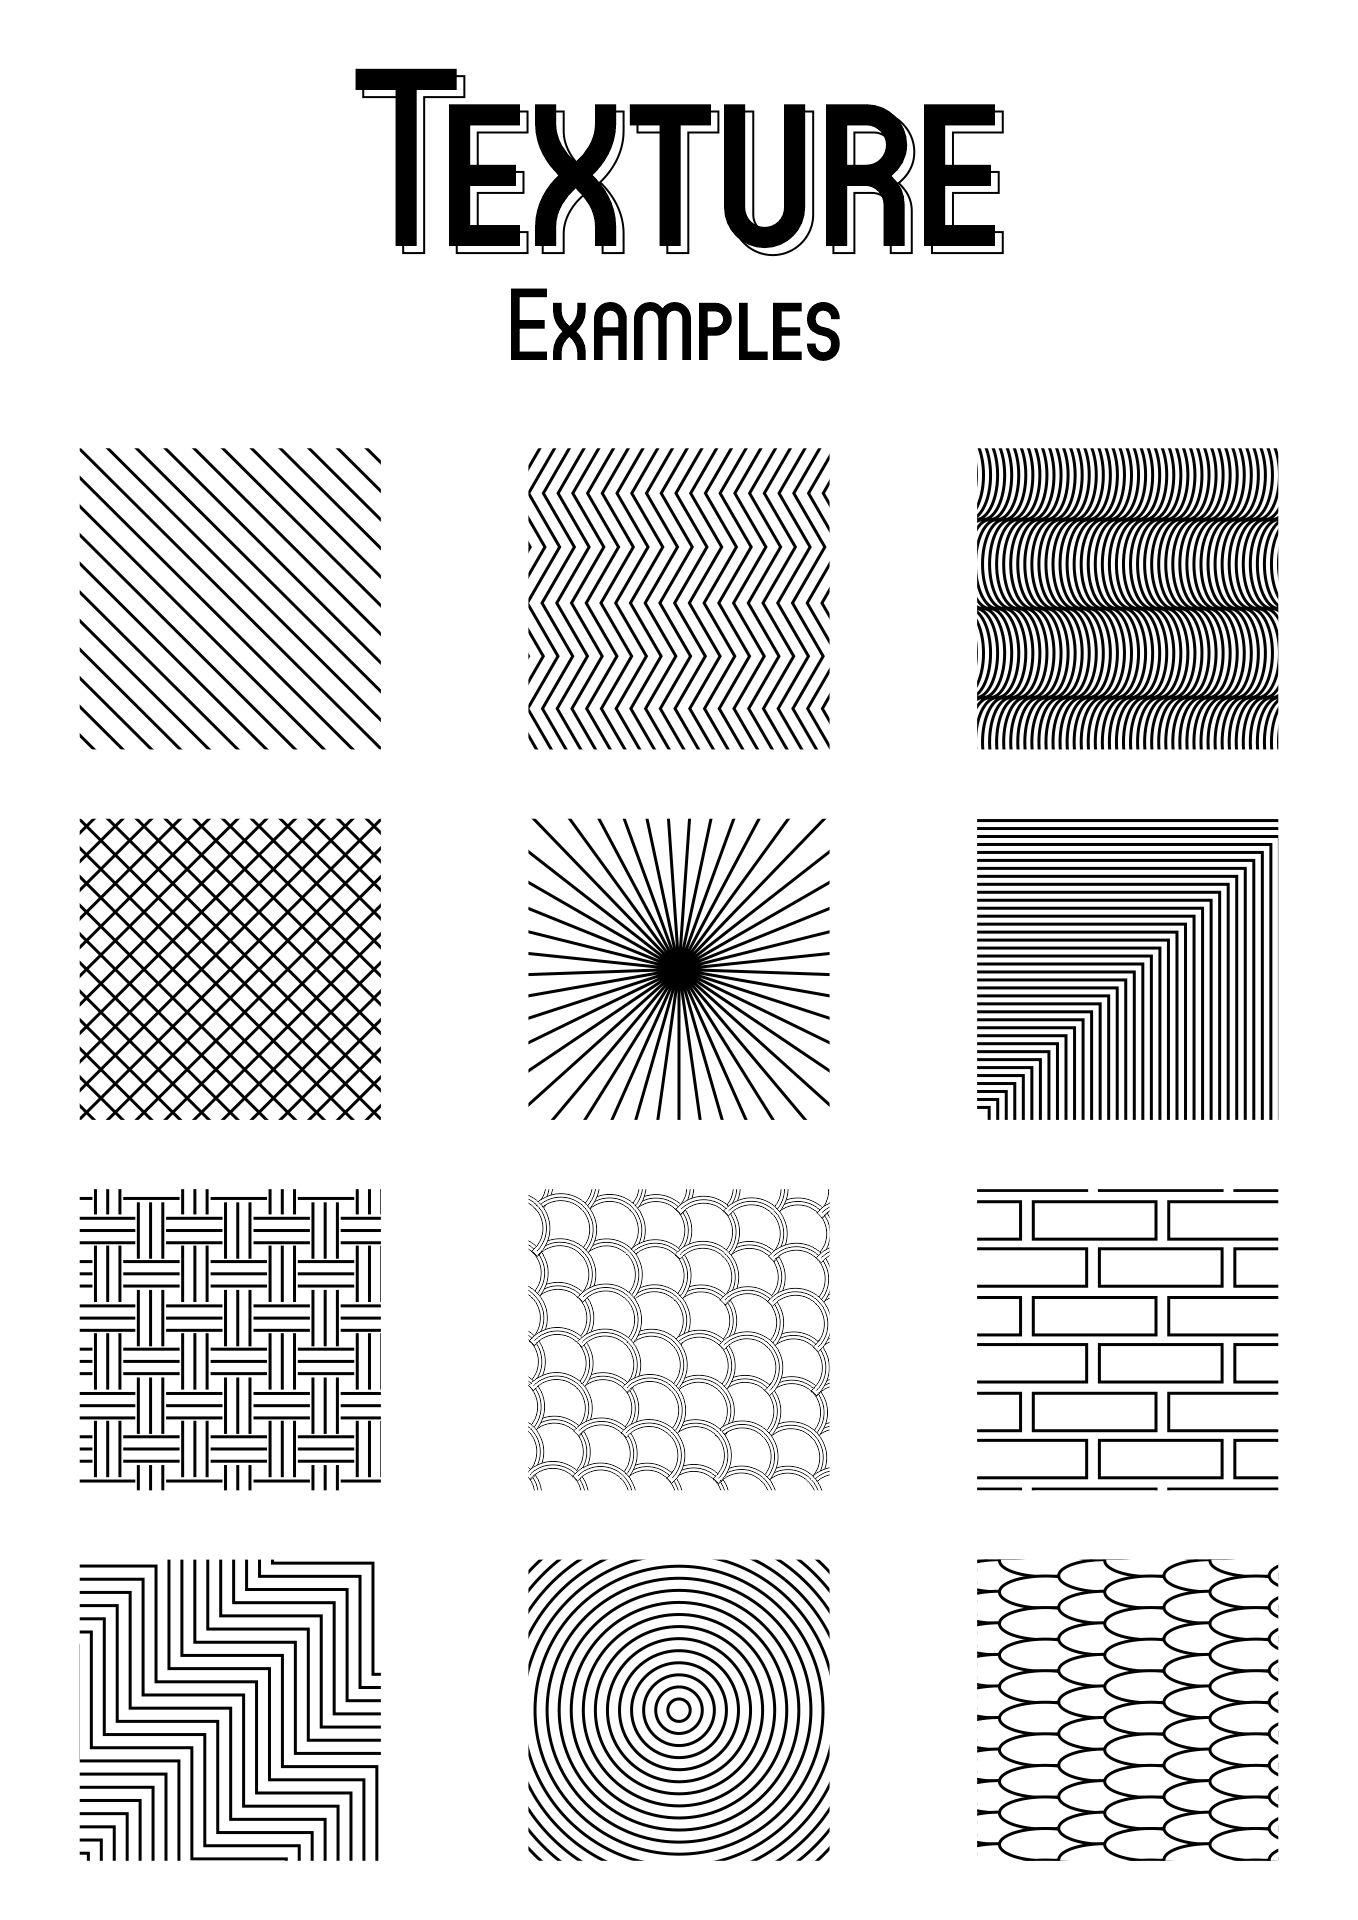 Art Texture Drawing Examples